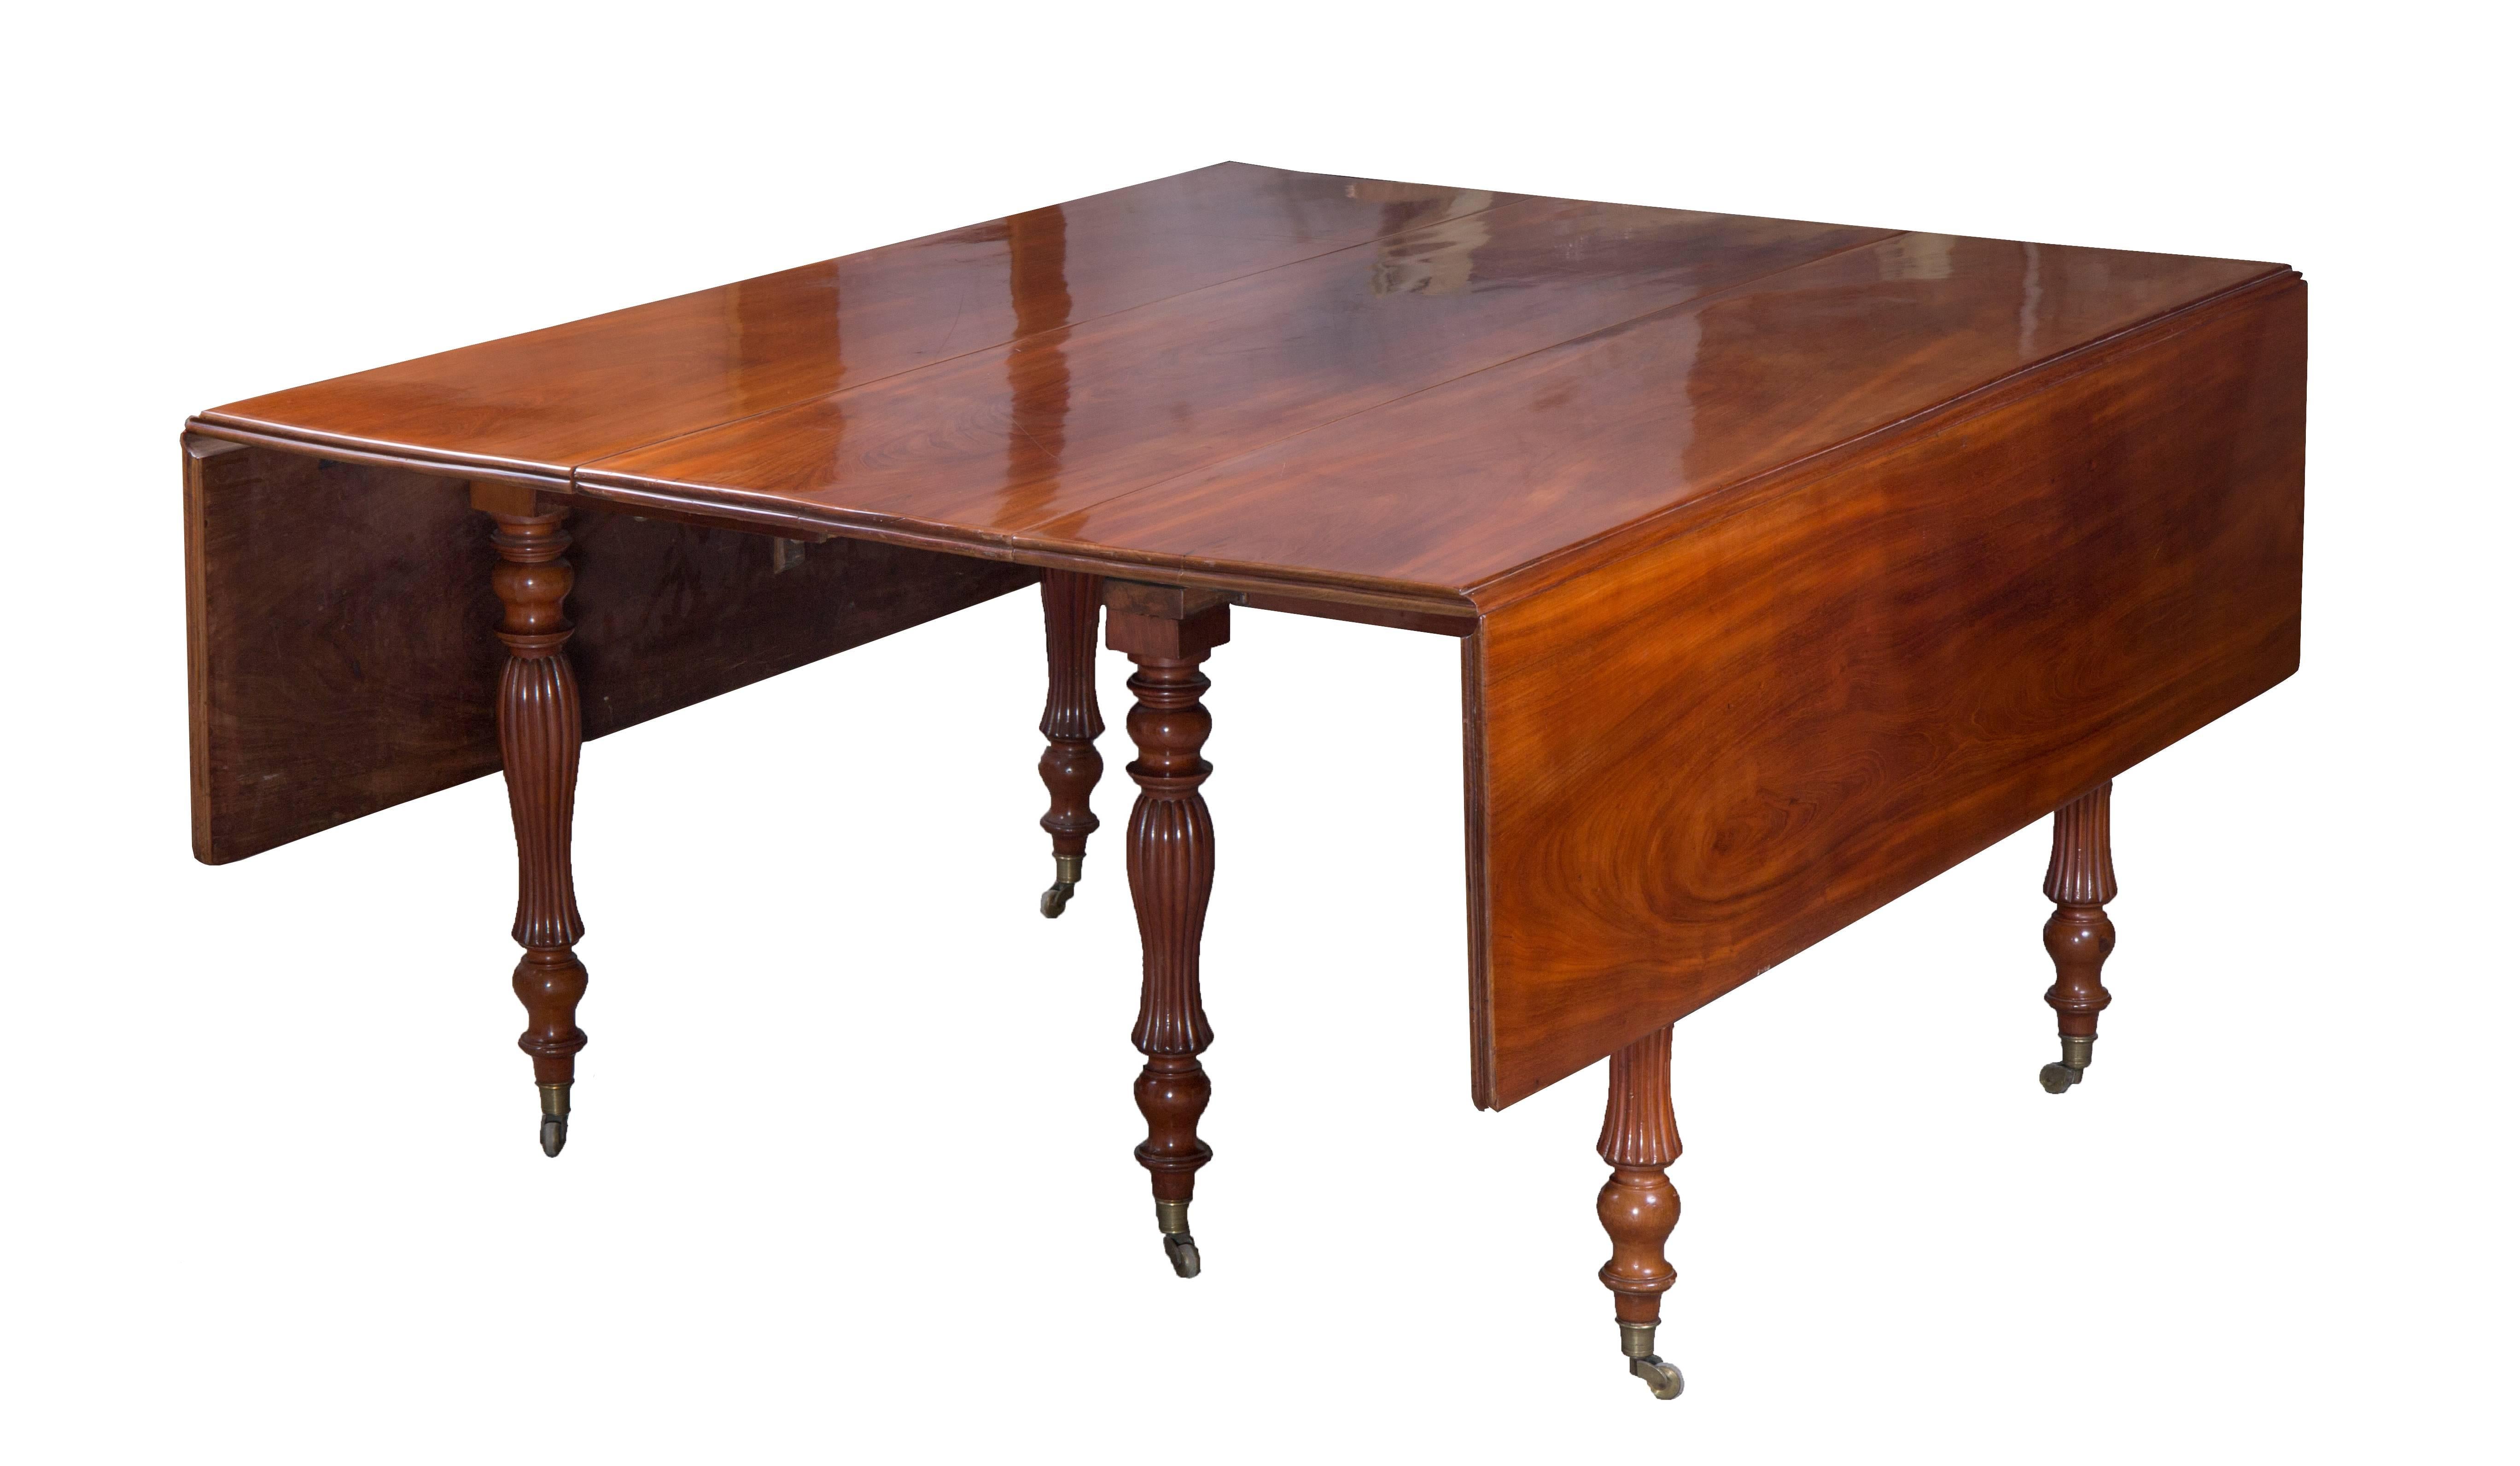 Mahogany veneered, height: 70 cm, extendable with extra leaves to 515 cm.
Edges moulded, legs sophisticated turned with brass endings, fold down, with two extra leaves.  